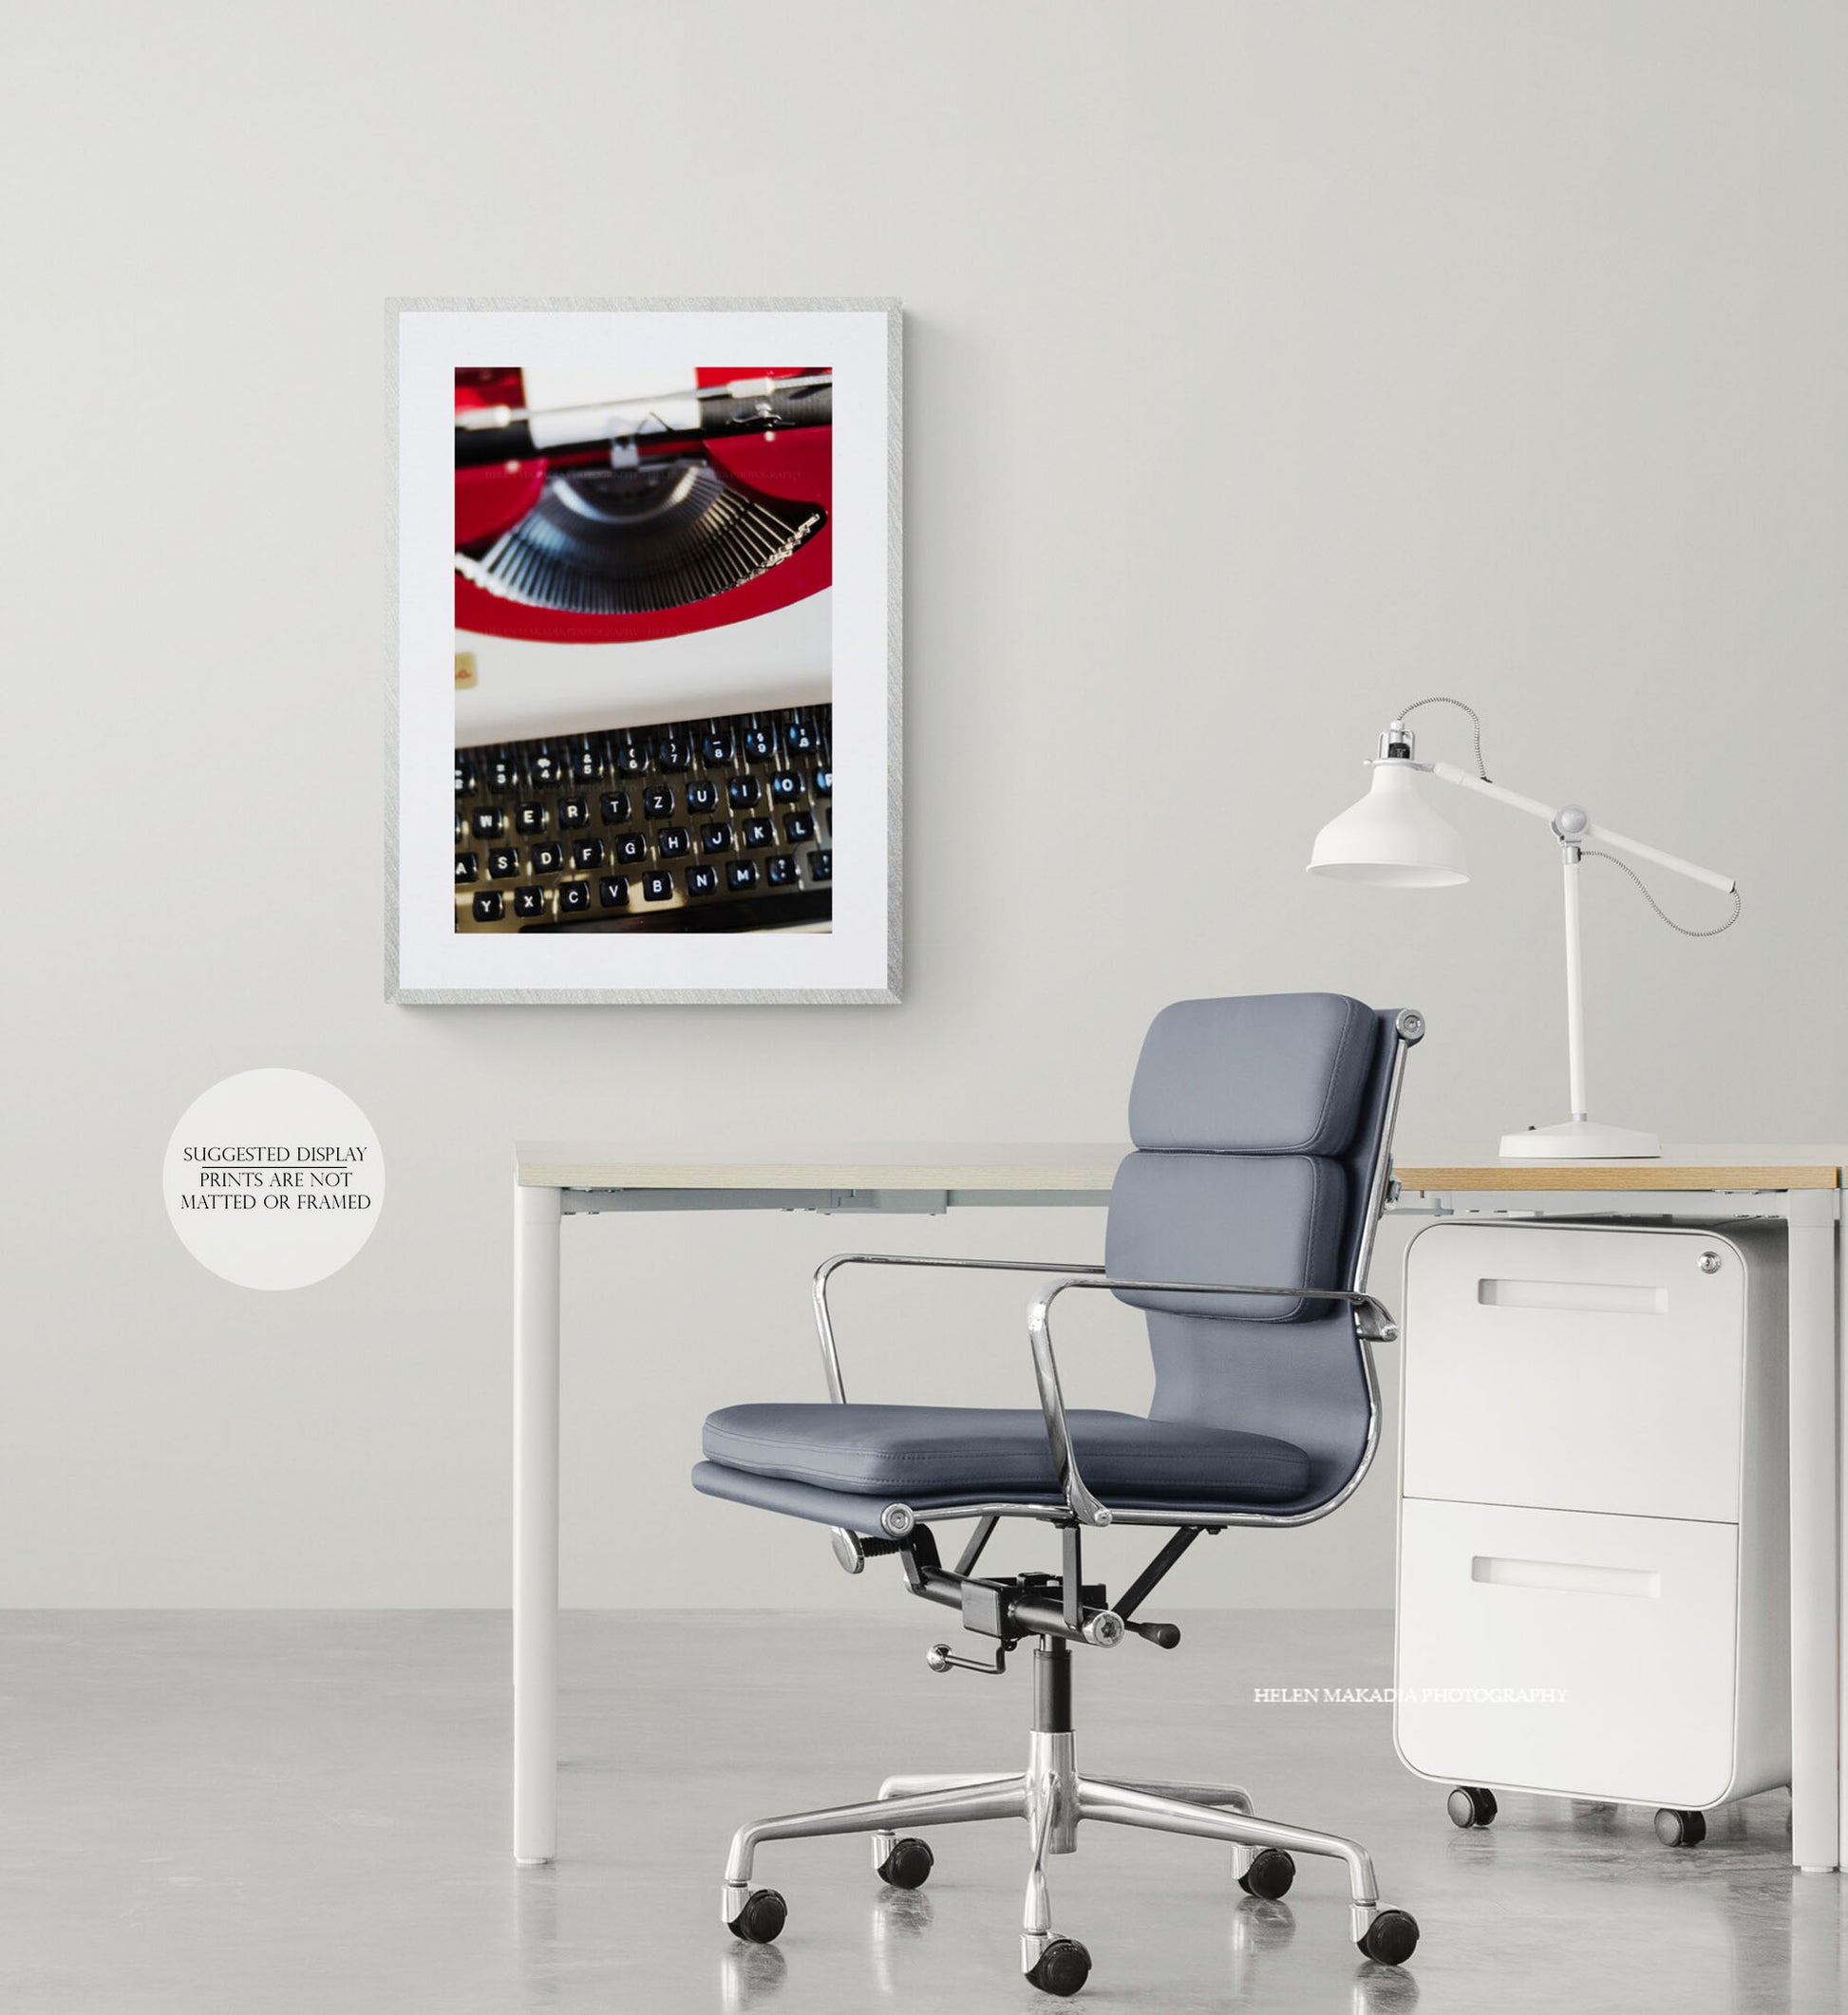 Framed photograph of a vintage mid-century typewriter, in a modern office